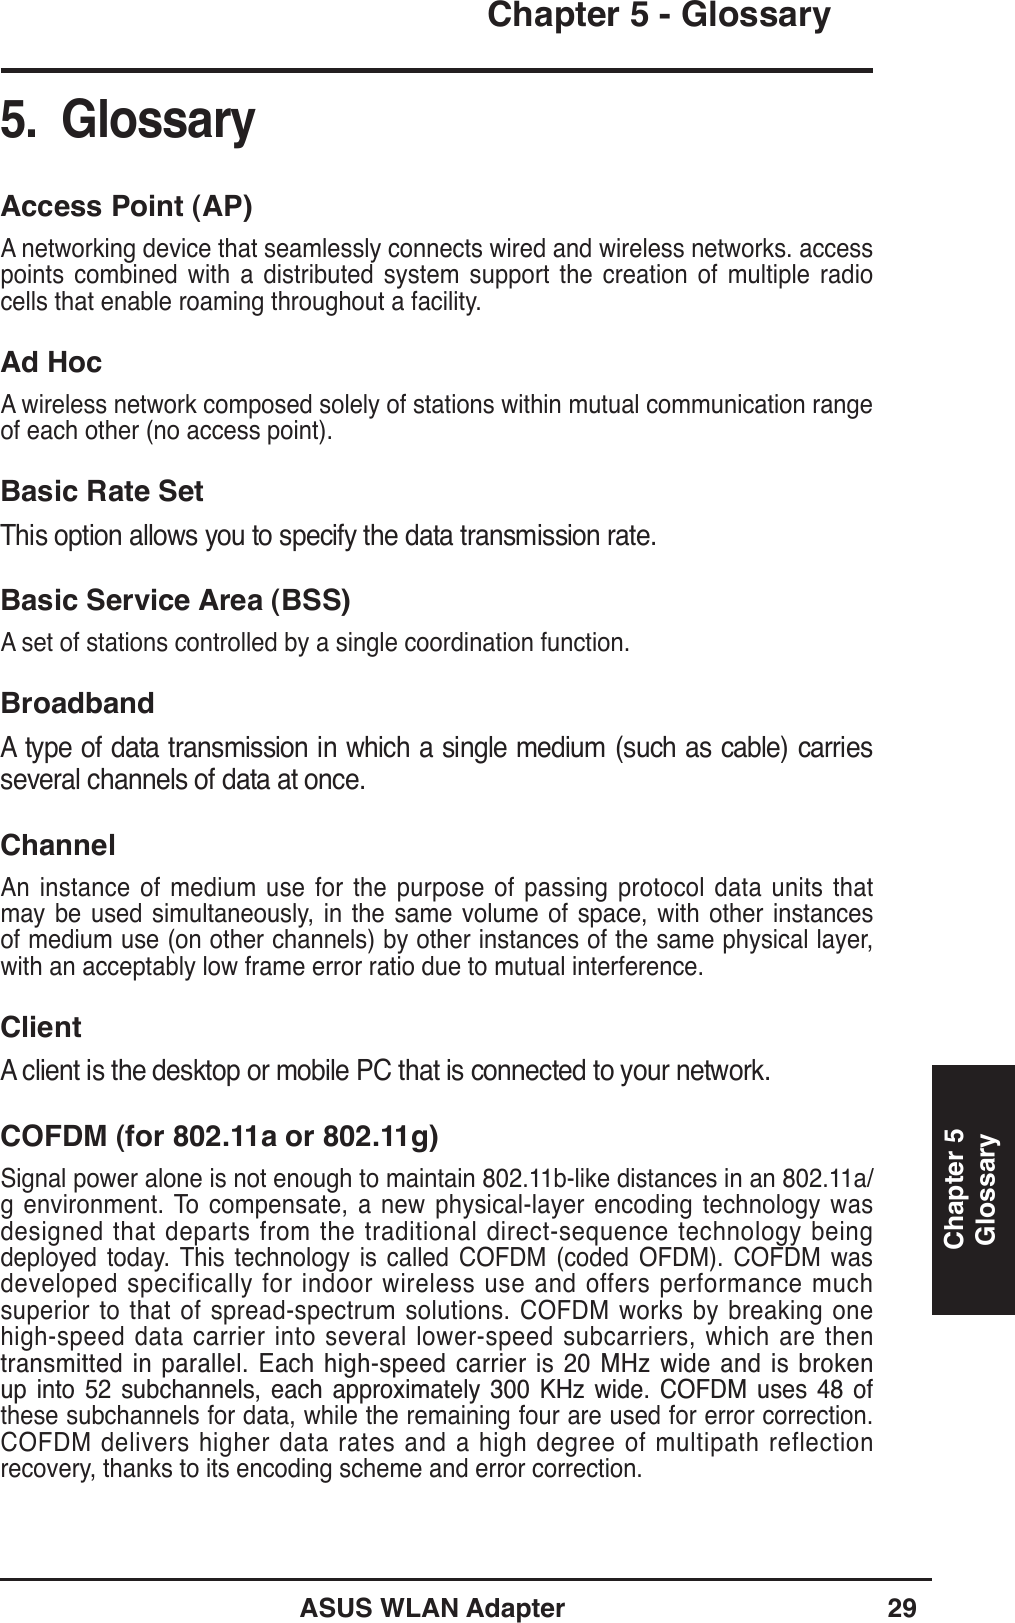 ASUS WLAN Adapter 29Chapter 5Chapter 5 - GlossaryGlossary5.  GlossaryAccess Point (AP)A networking device that seamlessly connects wired and wireless networks. access points combined with a distributed system support the creation of multiple radio cells that enable roaming throughout a facility.Ad HocA wireless network composed solely of stations within mutual communication range of each other (no access point).Basic Rate SetThis option allows you to specify the data transmission rate.Basic Service Area (BSS)A set of stations controlled by a single coordination function.BroadbandA type of data transmission in which a single medium (such as cable) carries several channels of data at once.ChannelAn instance of medium use for the purpose of passing protocol data units that may be used simultaneously, in the same volume of space, with other instances of medium use (on other channels) by other instances of the same physical layer, with an acceptably low frame error ratio due to mutual interference.ClientA client is the desktop or mobile PC that is connected to your network.COFDM (for 802.11a or 802.11g)Signal power alone is not enough to maintain 802.11b-like distances in an 802.11a/g environment. To compensate, a new physical-layer encoding technology was designed that departs from the traditional direct-sequence technology being deployed today. This technology is called COFDM (coded OFDM). COFDM was developed specifically for indoor wireless use and offers performance much superior to that of spread-spectrum solutions. COFDM works by breaking one high-speed data carrier into several lower-speed subcarriers, which are then WUDQVPLWWHG LQSDUDOOHO(DFK KLJKVSHHGFDUULHULV0+] ZLGHDQGLV EURNHQXS LQWR  VXEFKDQQHOV HDFK DSSUR[LPDWHO\  .+] ZLGH &amp;2)&apos;0 XVHV  RIthese subchannels for data, while the remaining four are used for error correction. COFDM delivers higher data rates and a high degree of multipath reflection recovery, thanks to its encoding scheme and error correction.